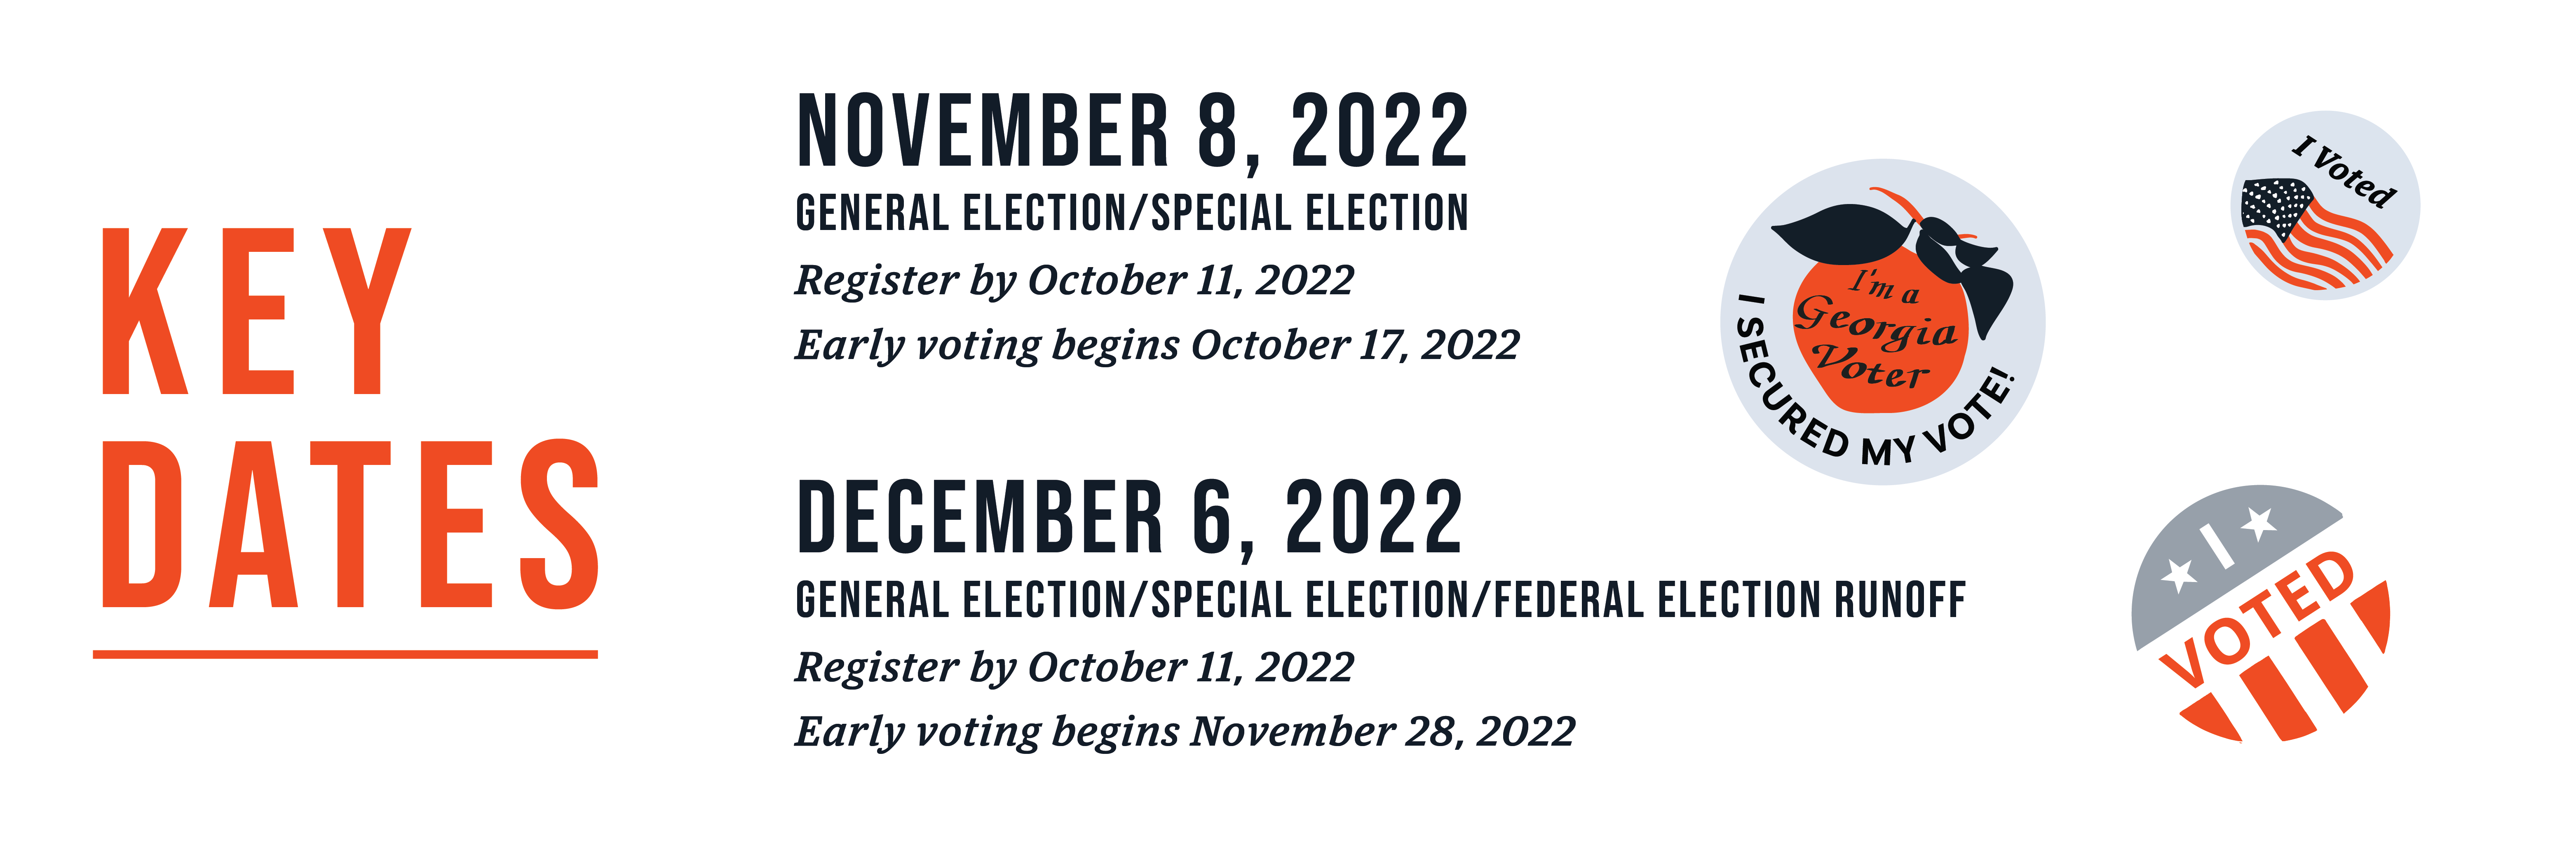 BlogGraphics August Midterms KeyDate